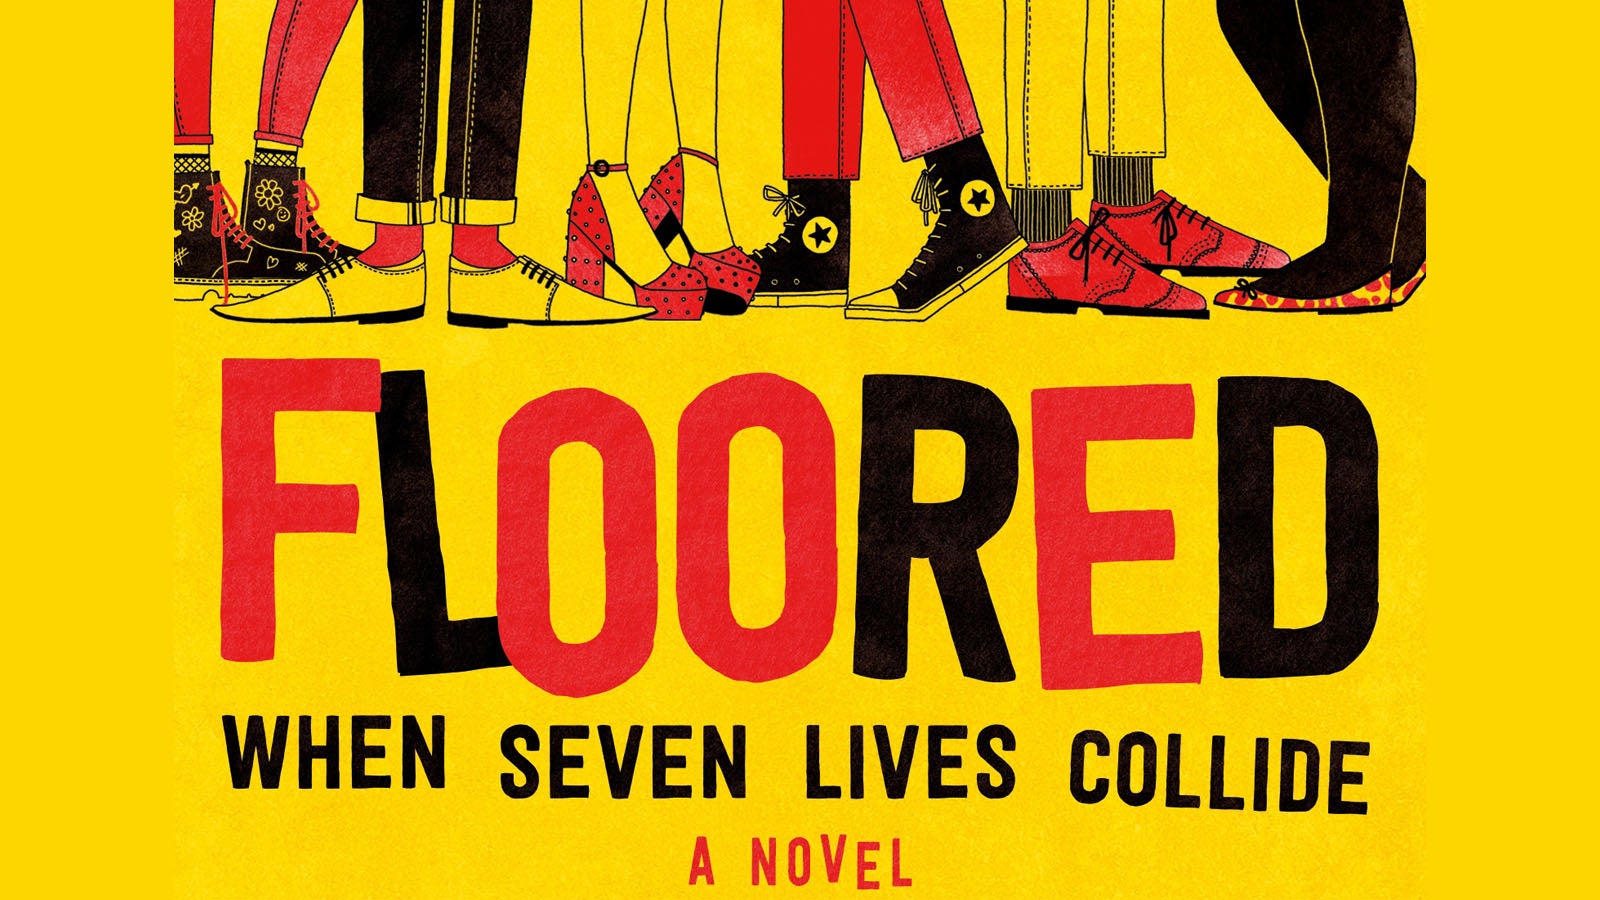 Section of Floored book jacket showing the title and illustrations of the characters' legs